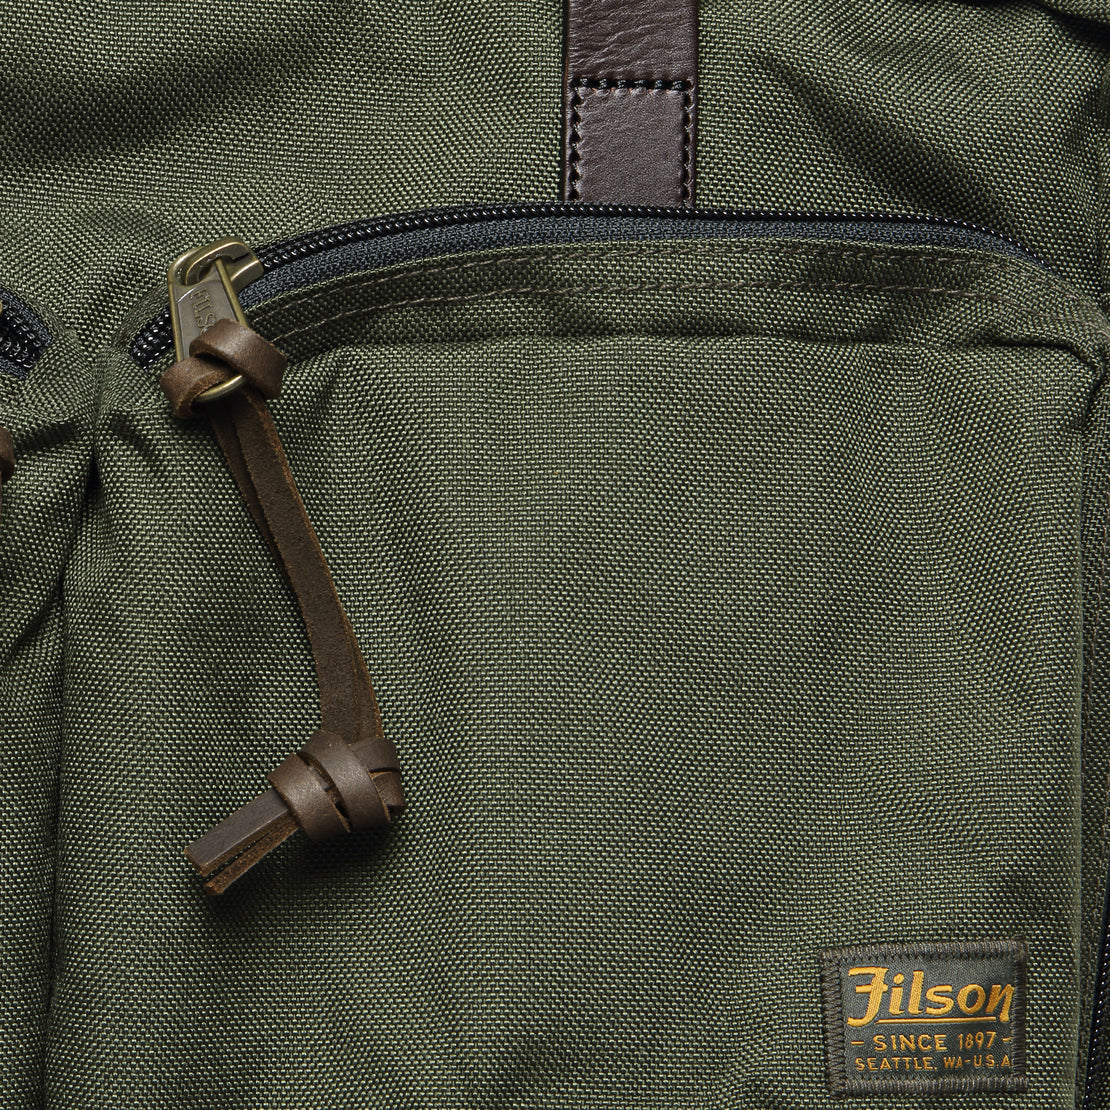 Dryden Briefcase - Otter Green - Filson - STAG Provisions - Accessories - Bags / Luggage